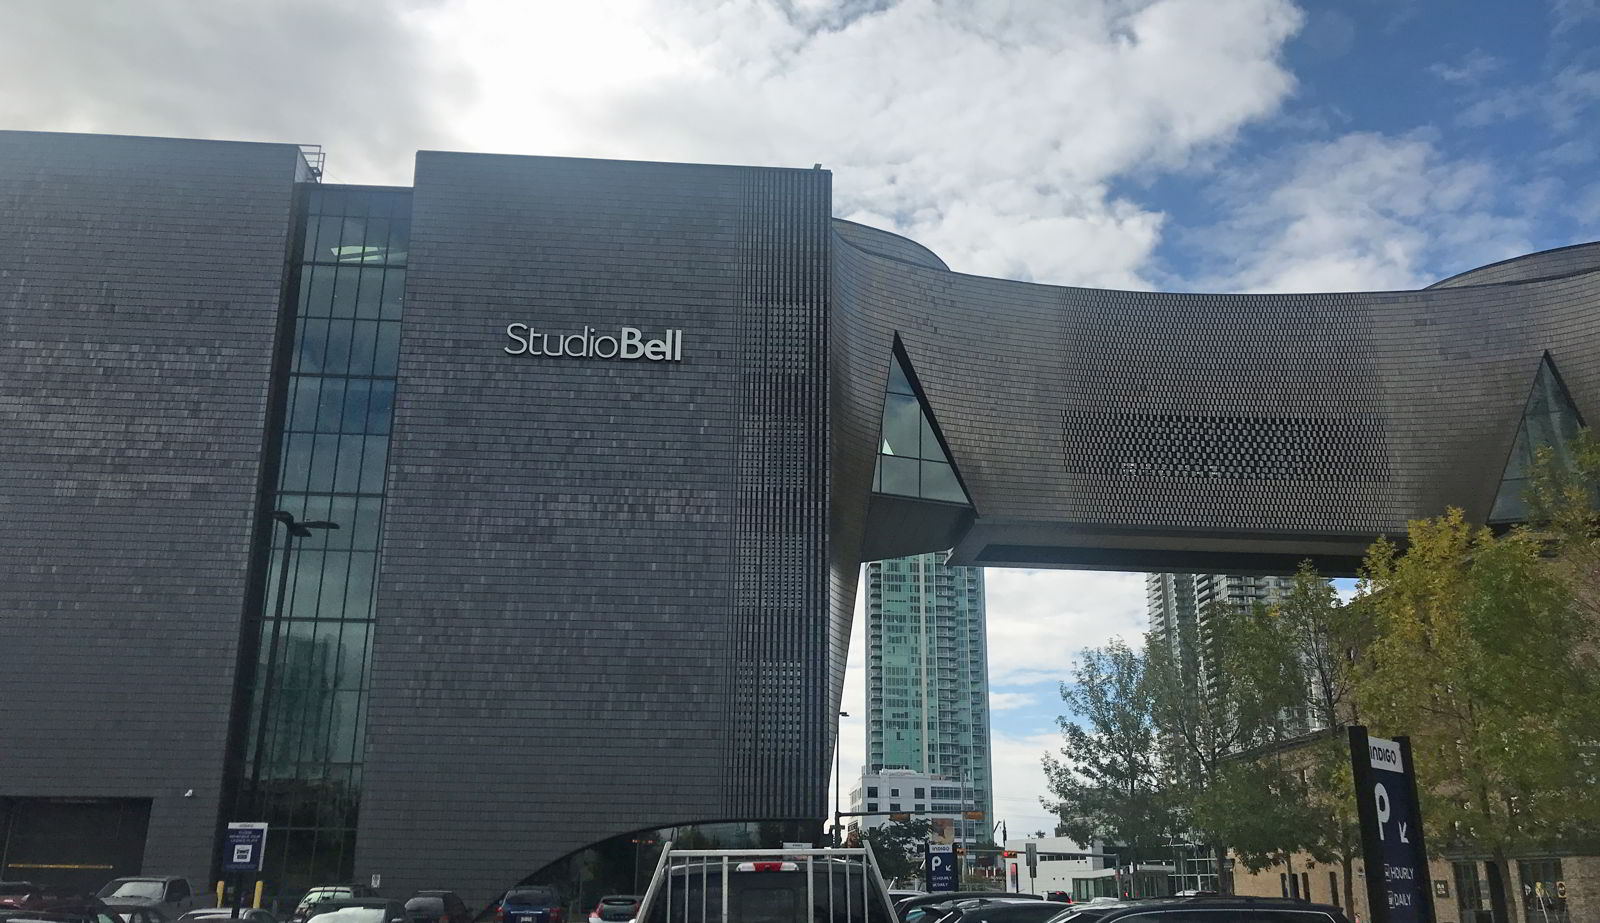 An image of the Studio Bell building, home to Canada's National Music Centre in Calgary, Alberta.